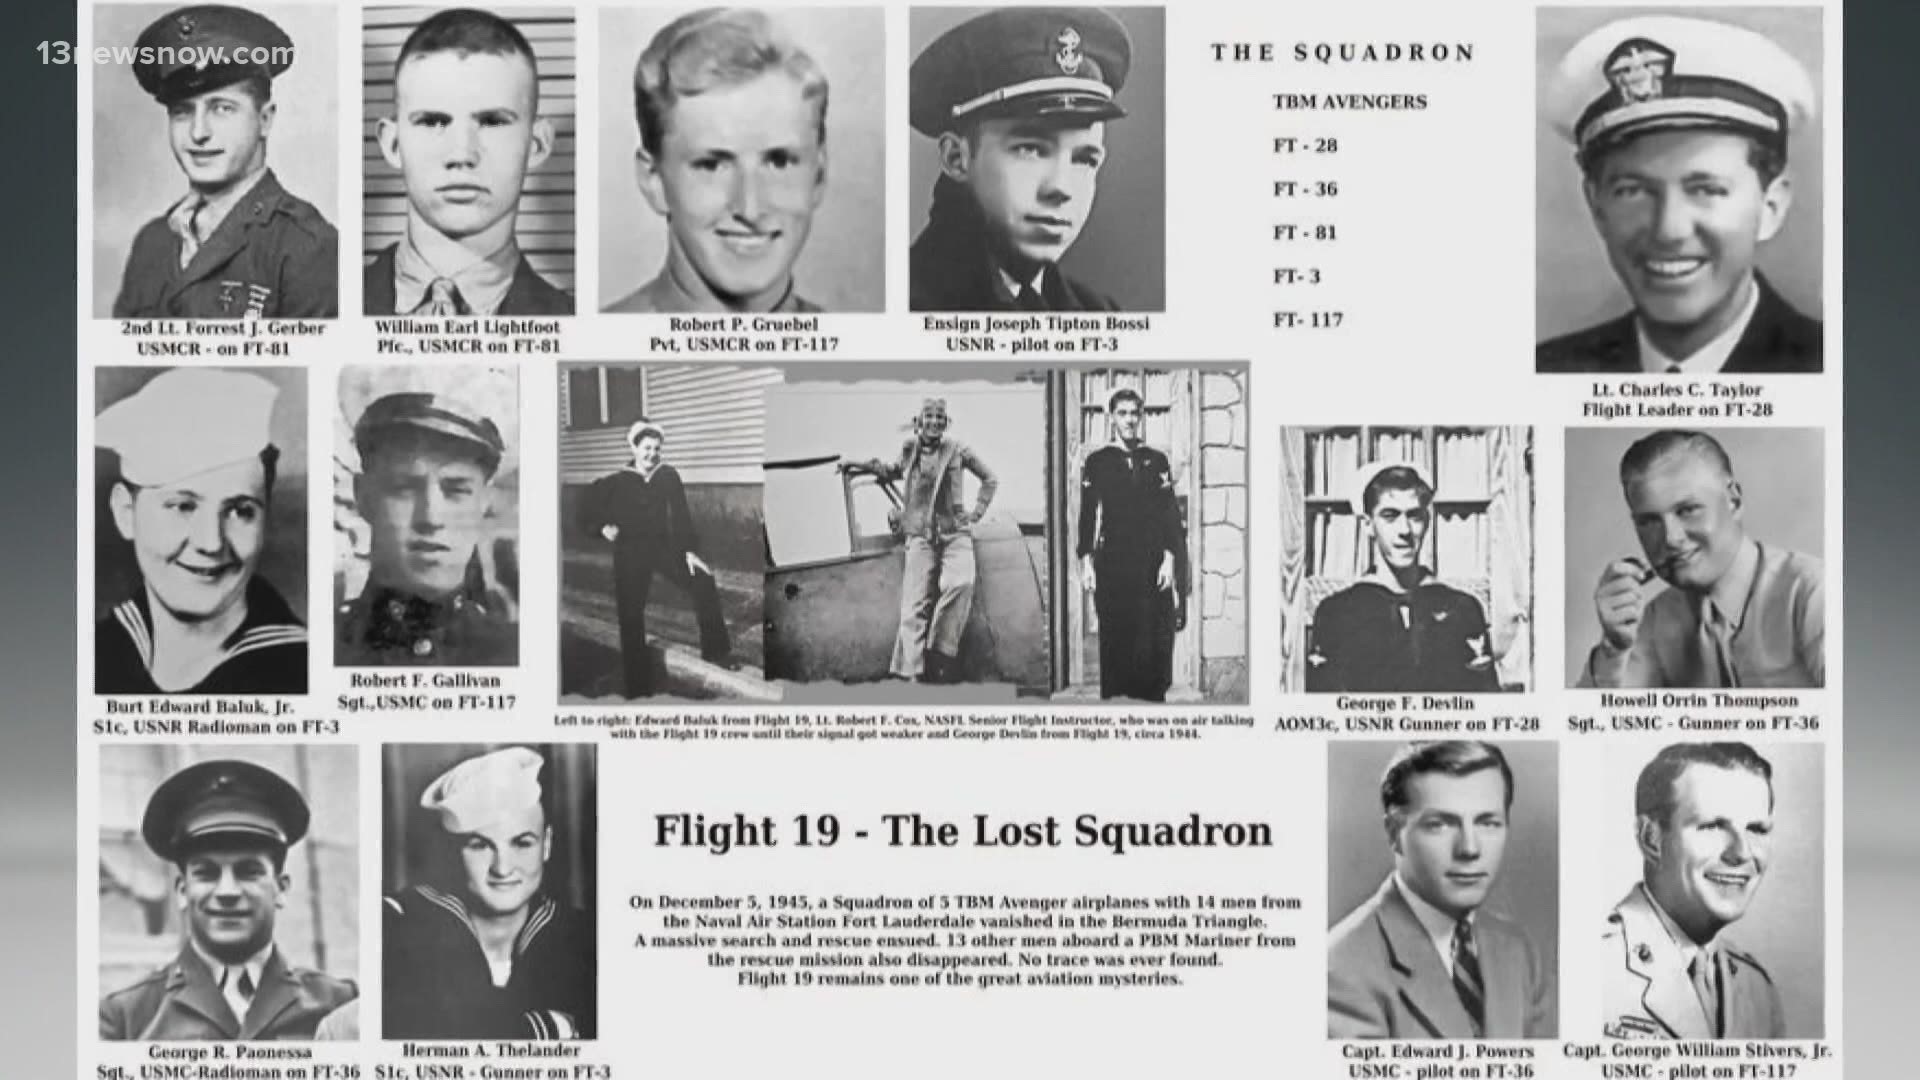 It's one of the enduring mysteries in US military lore. December 5 marks 75 years since the disappearance of "Flight 19" in the Bermuda Triangle.